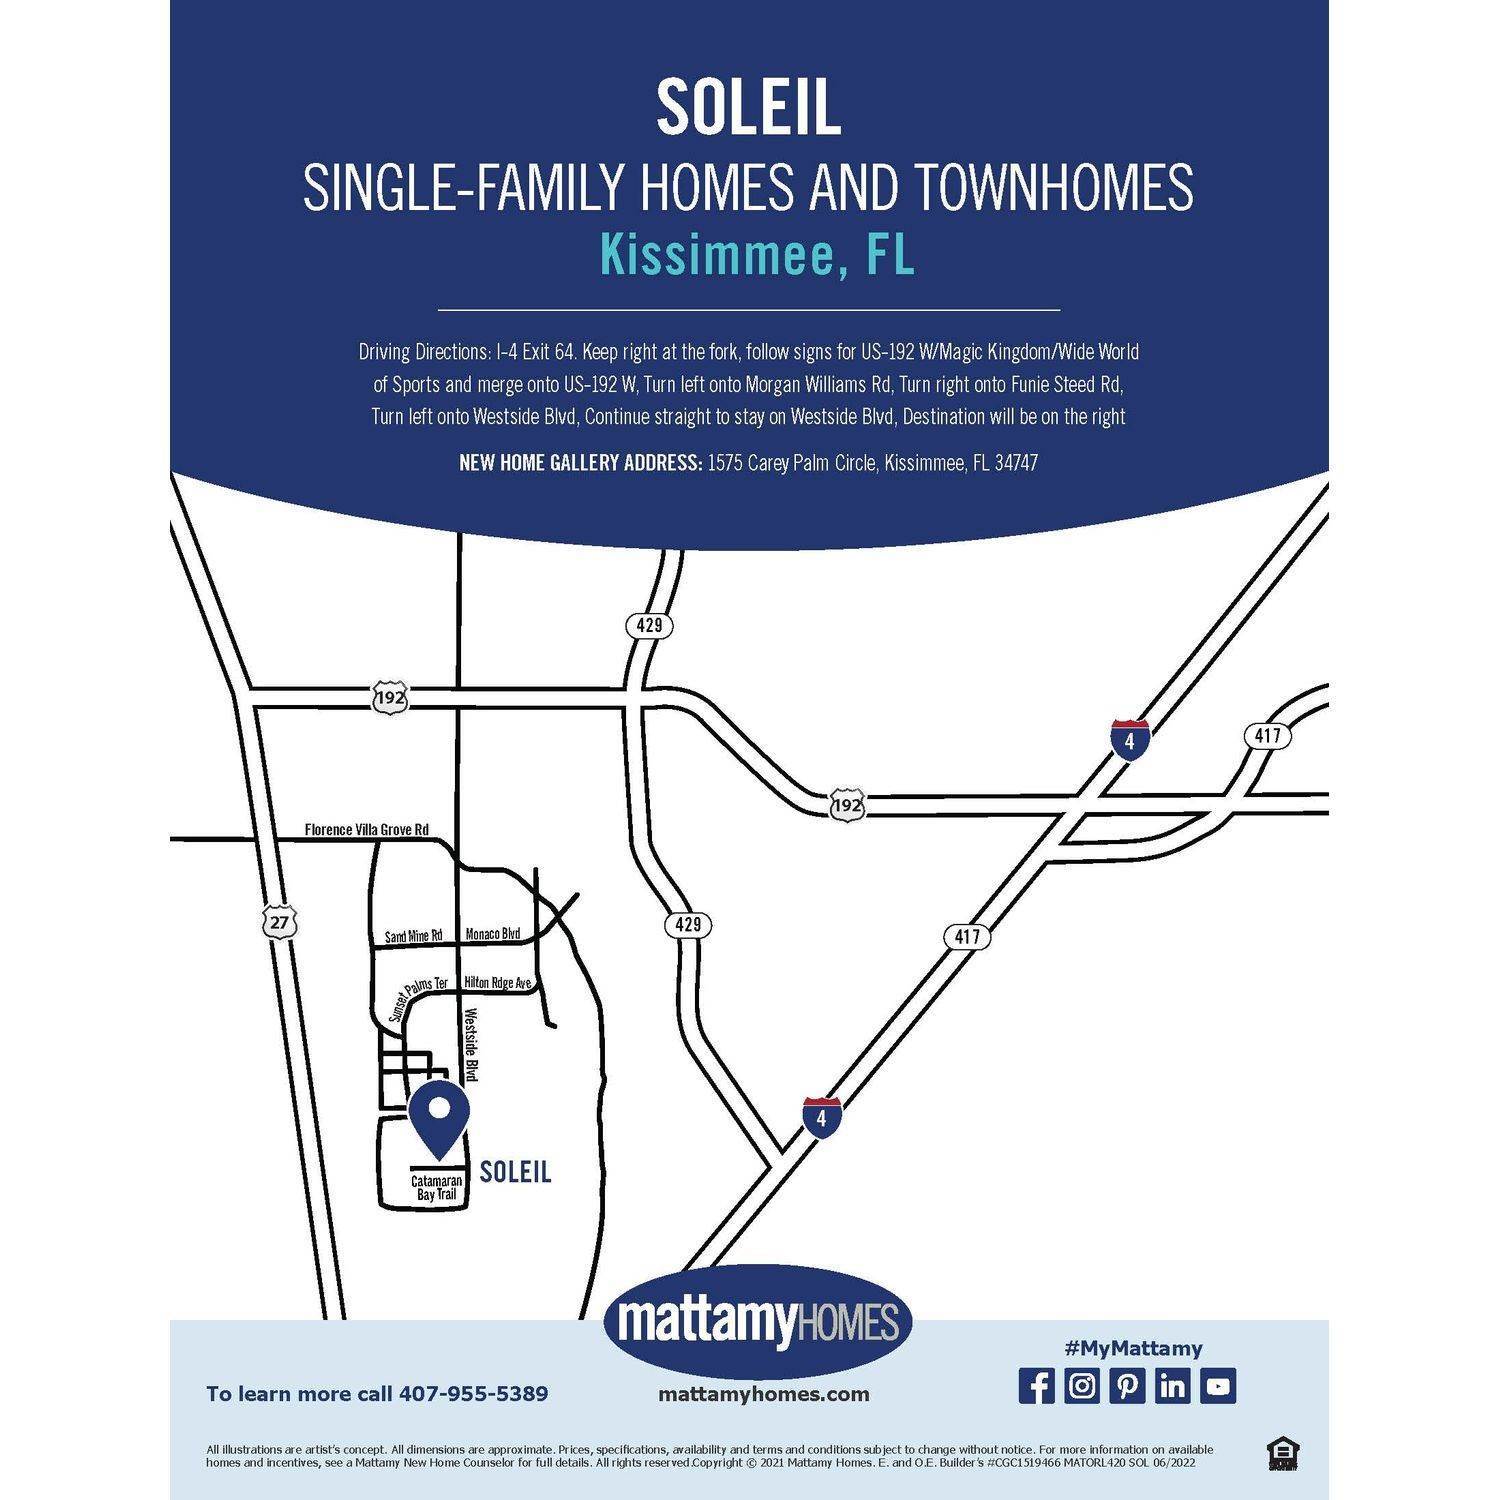 Soleil building at 1114 Turquoise Waves Cove, Kissimmee, FL 34747